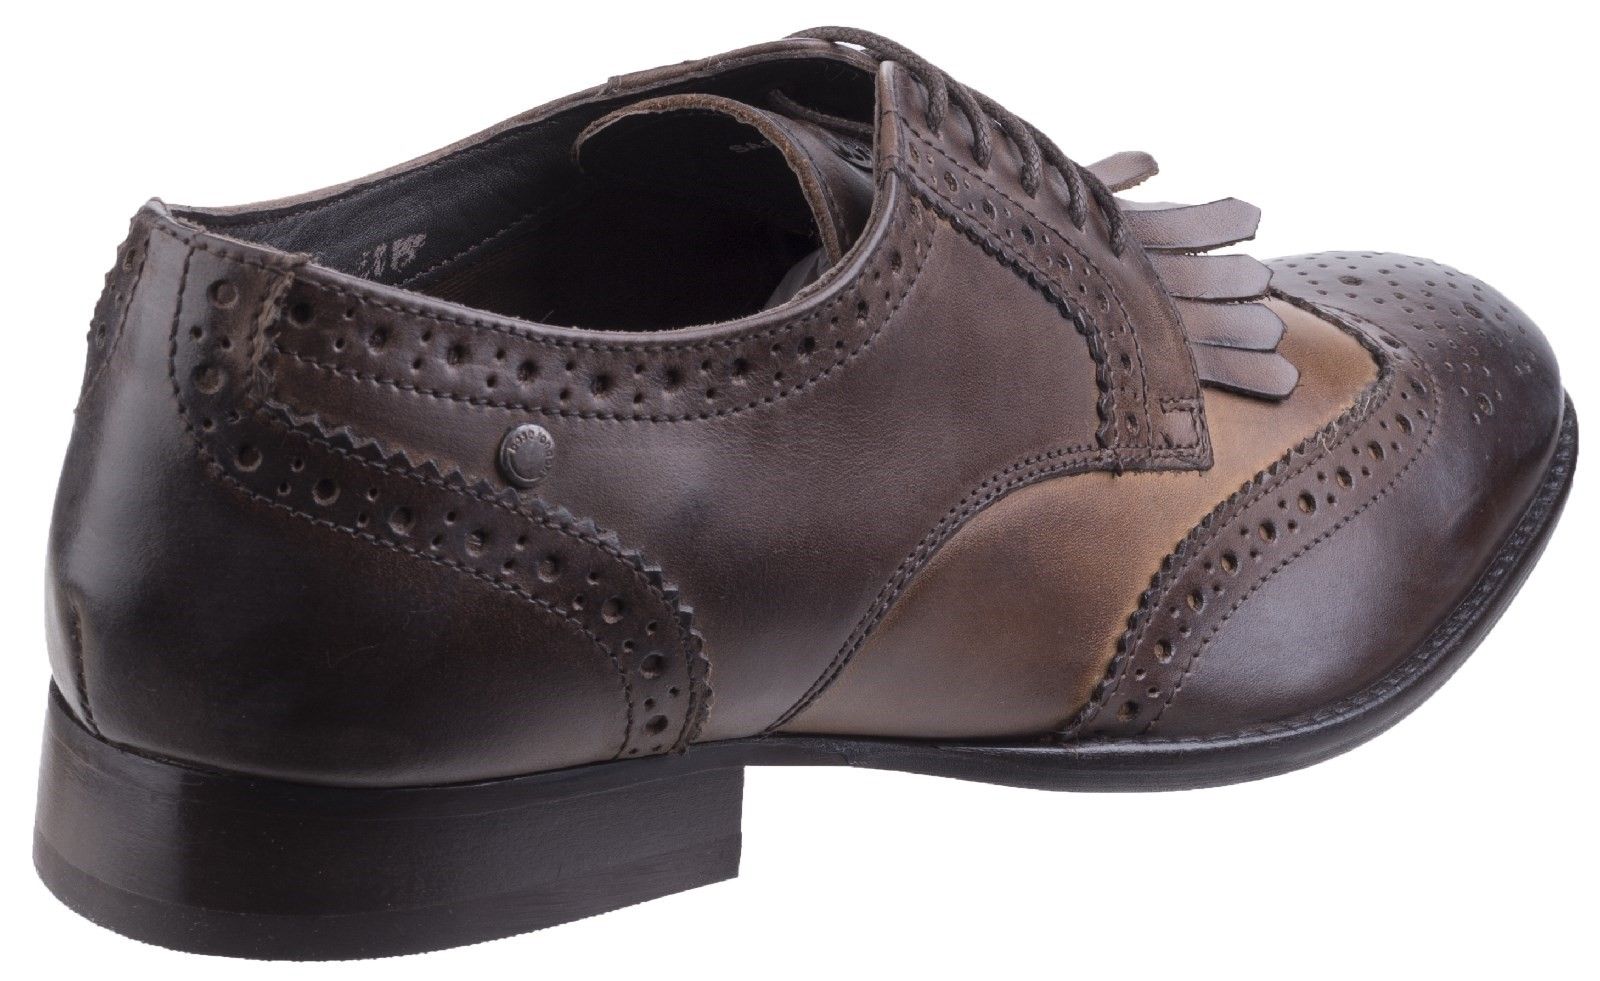 Bartley is a fringed brogue from the Base London Fashionista Range. Inspired by footwear from the 1920s, this formal shoe looks fresh out of La La Land...or do I mean Moonlight? This derby will perfect any fitted suit. Burnished leather providing a eye catching, worn finish. 
High quality leather lining.